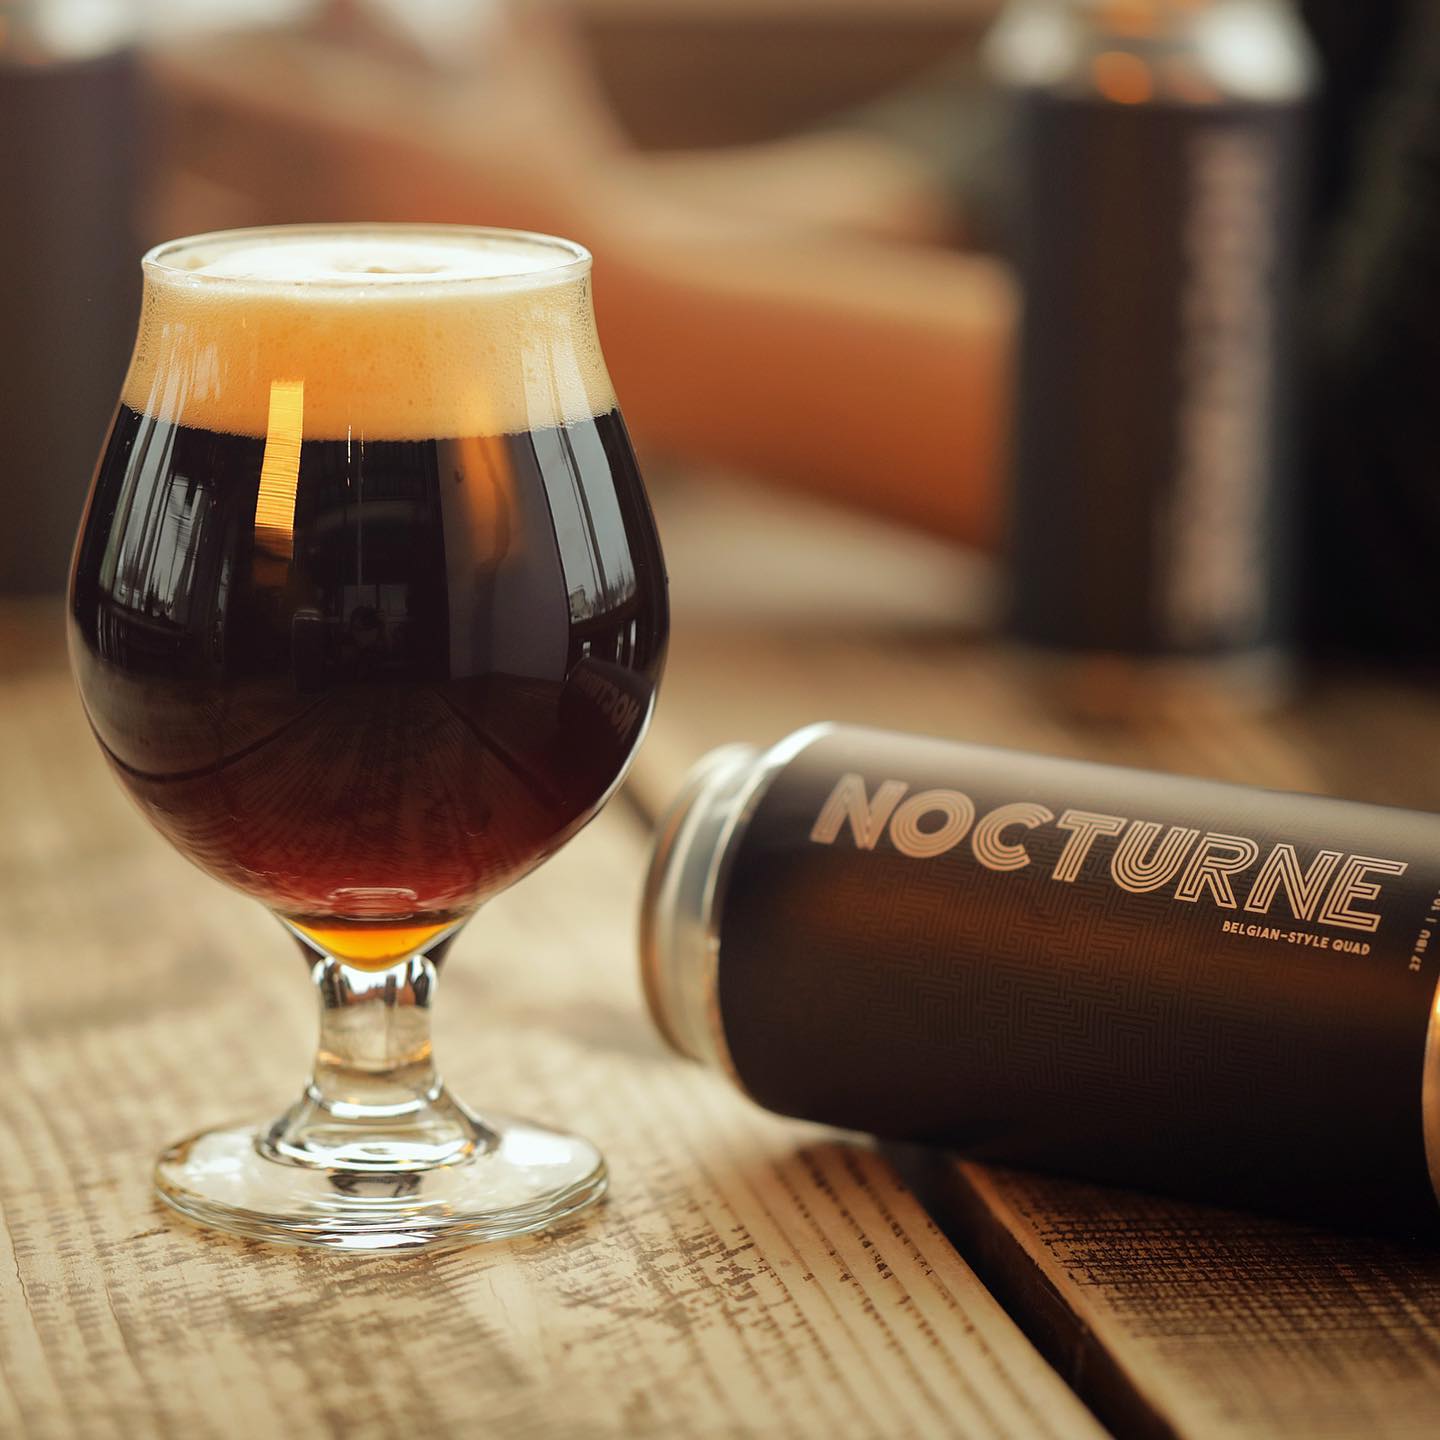 Nocturne - Twin City Brewing